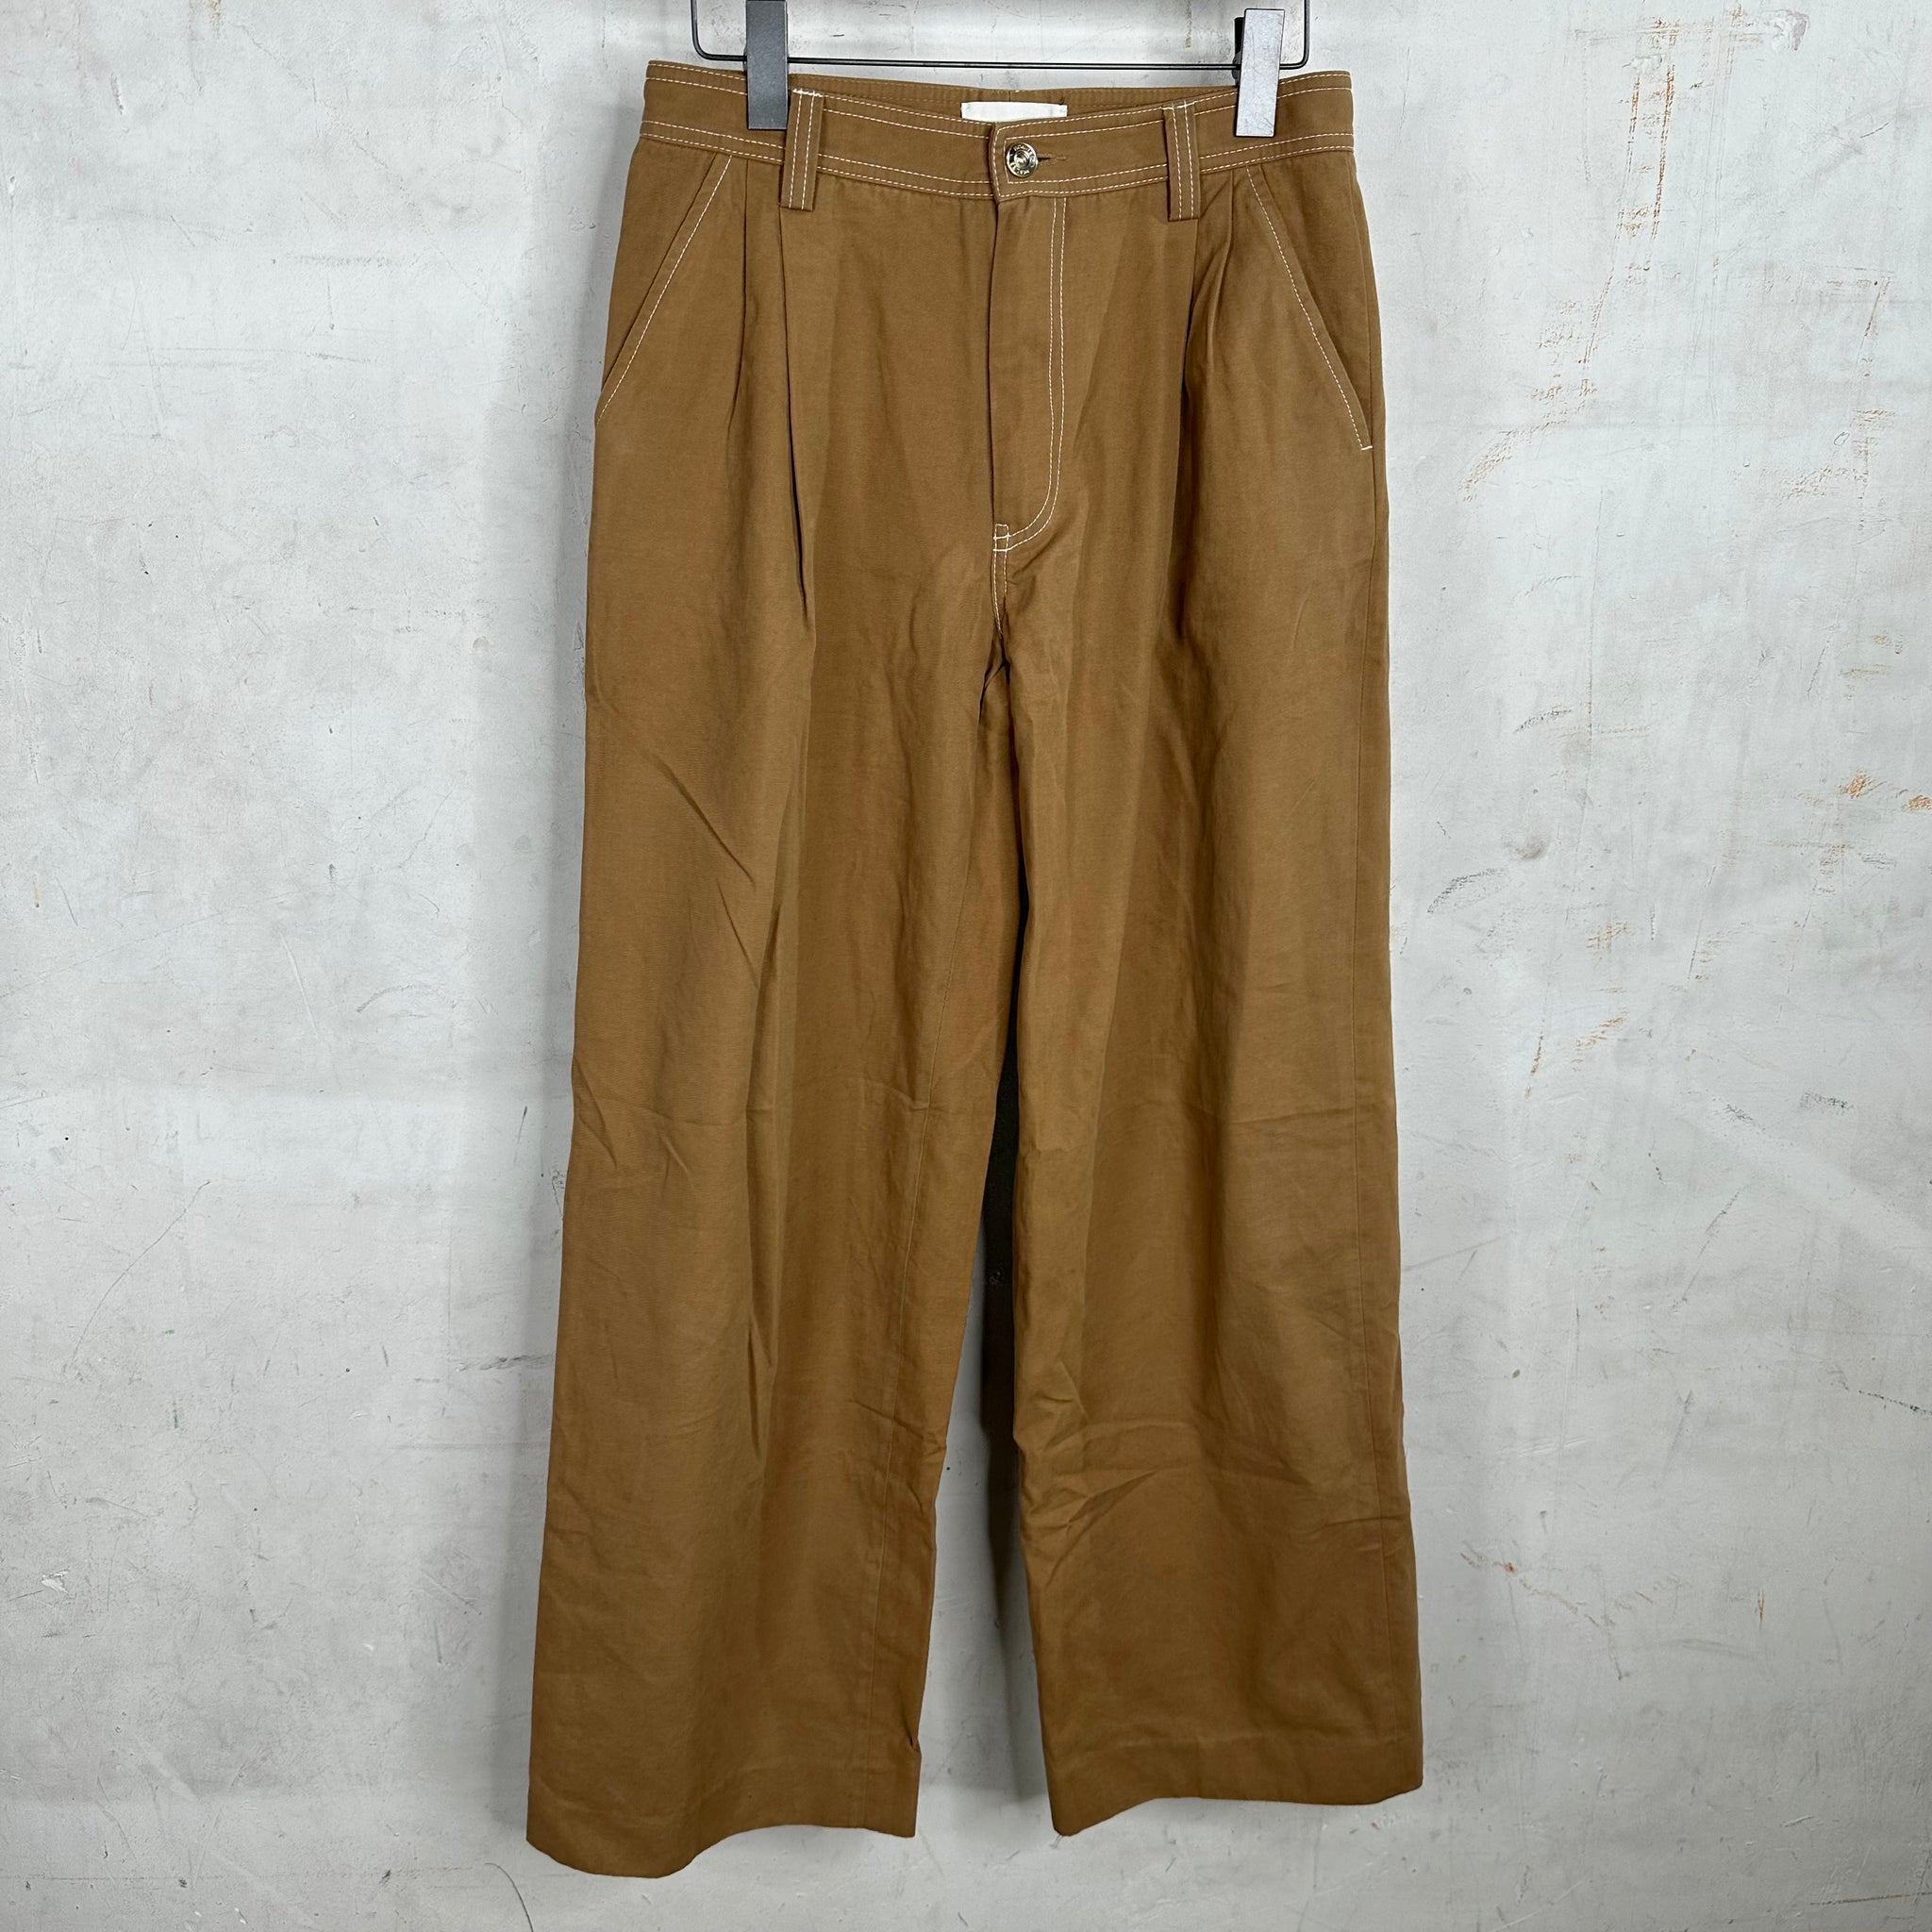 Wales Bonner Pleated Chinos